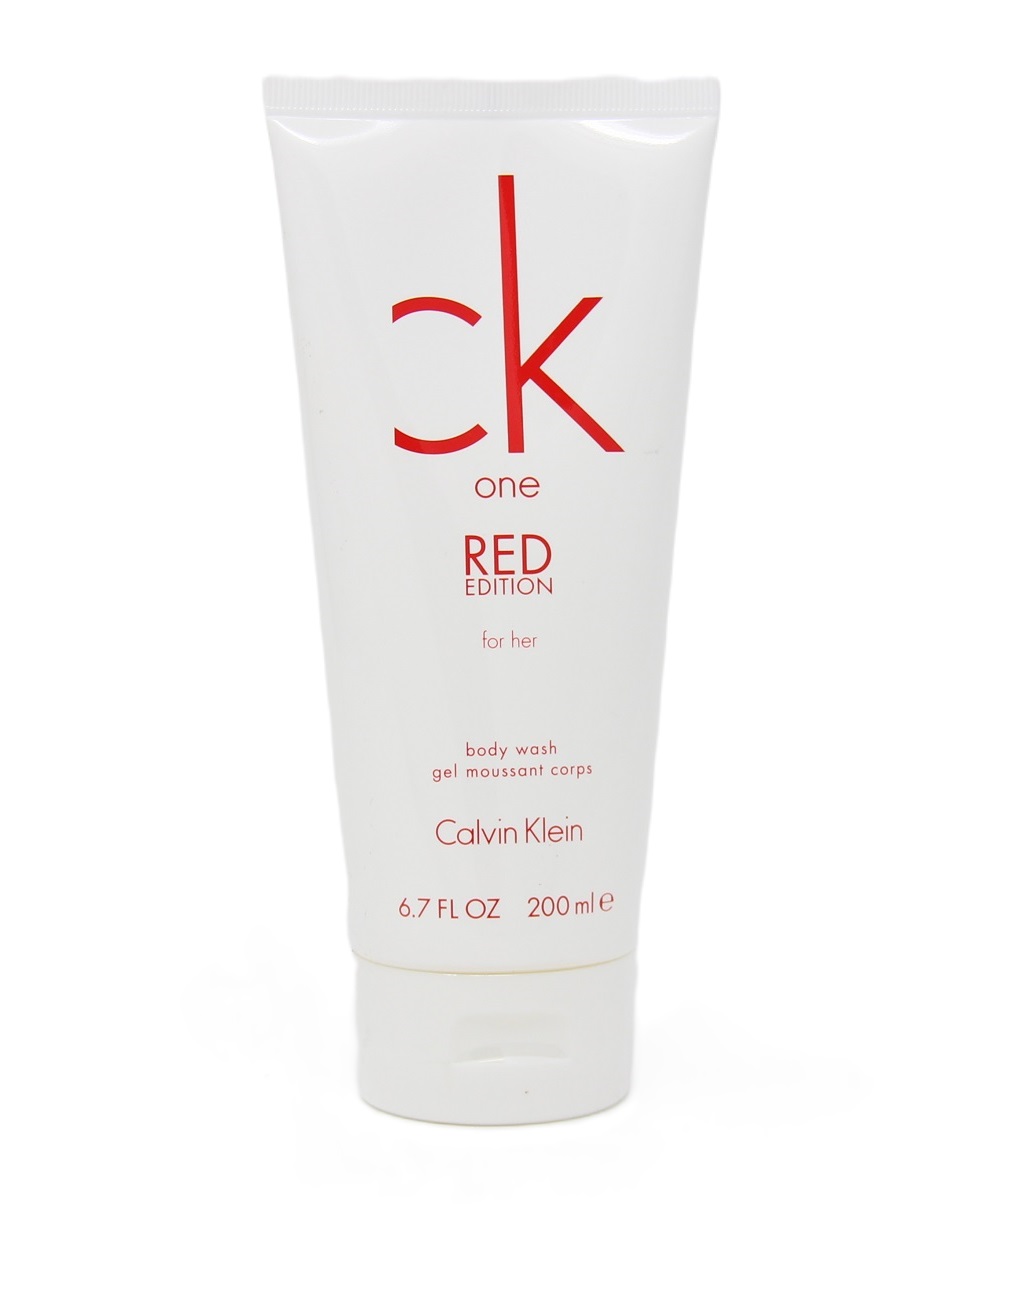 Calvin Klein One Red Edition For Her Body Wash 200ml